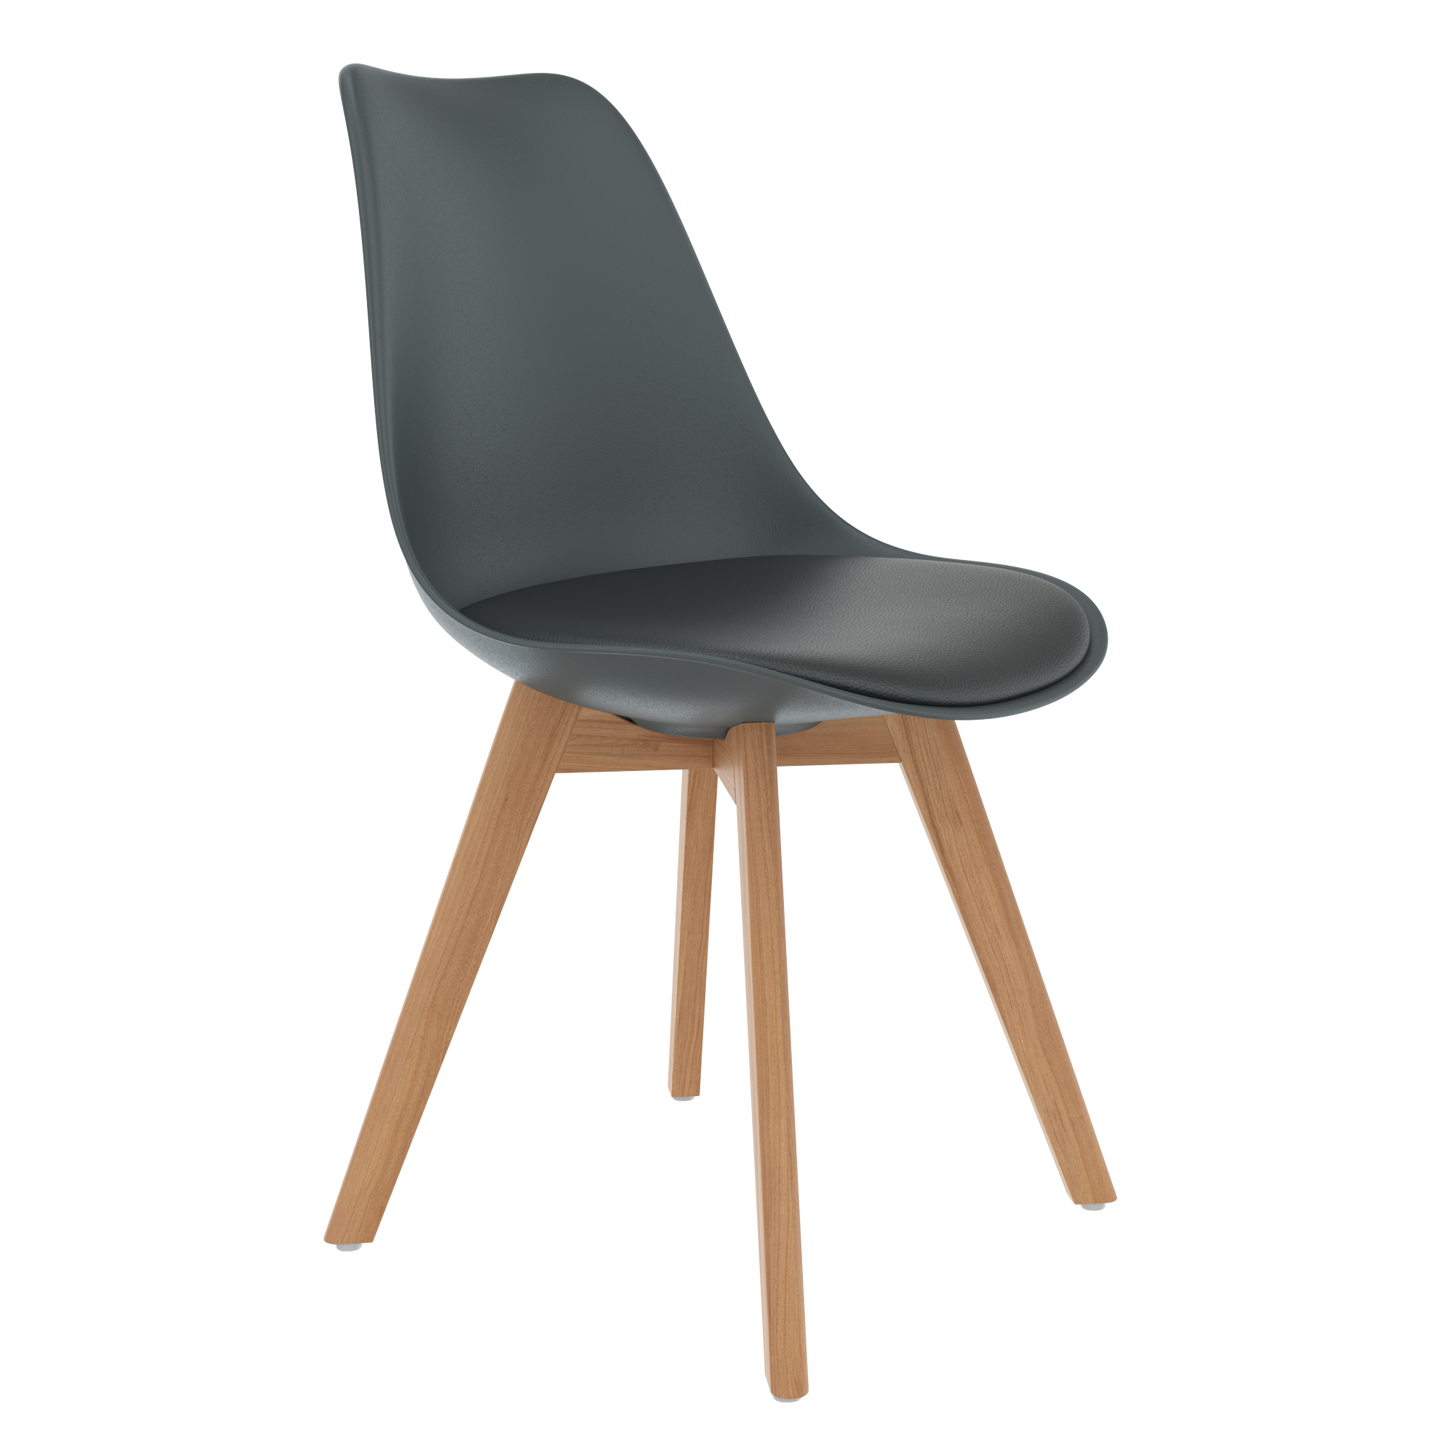 CHOTTO - Ando Dining Chairs - Grey x 2